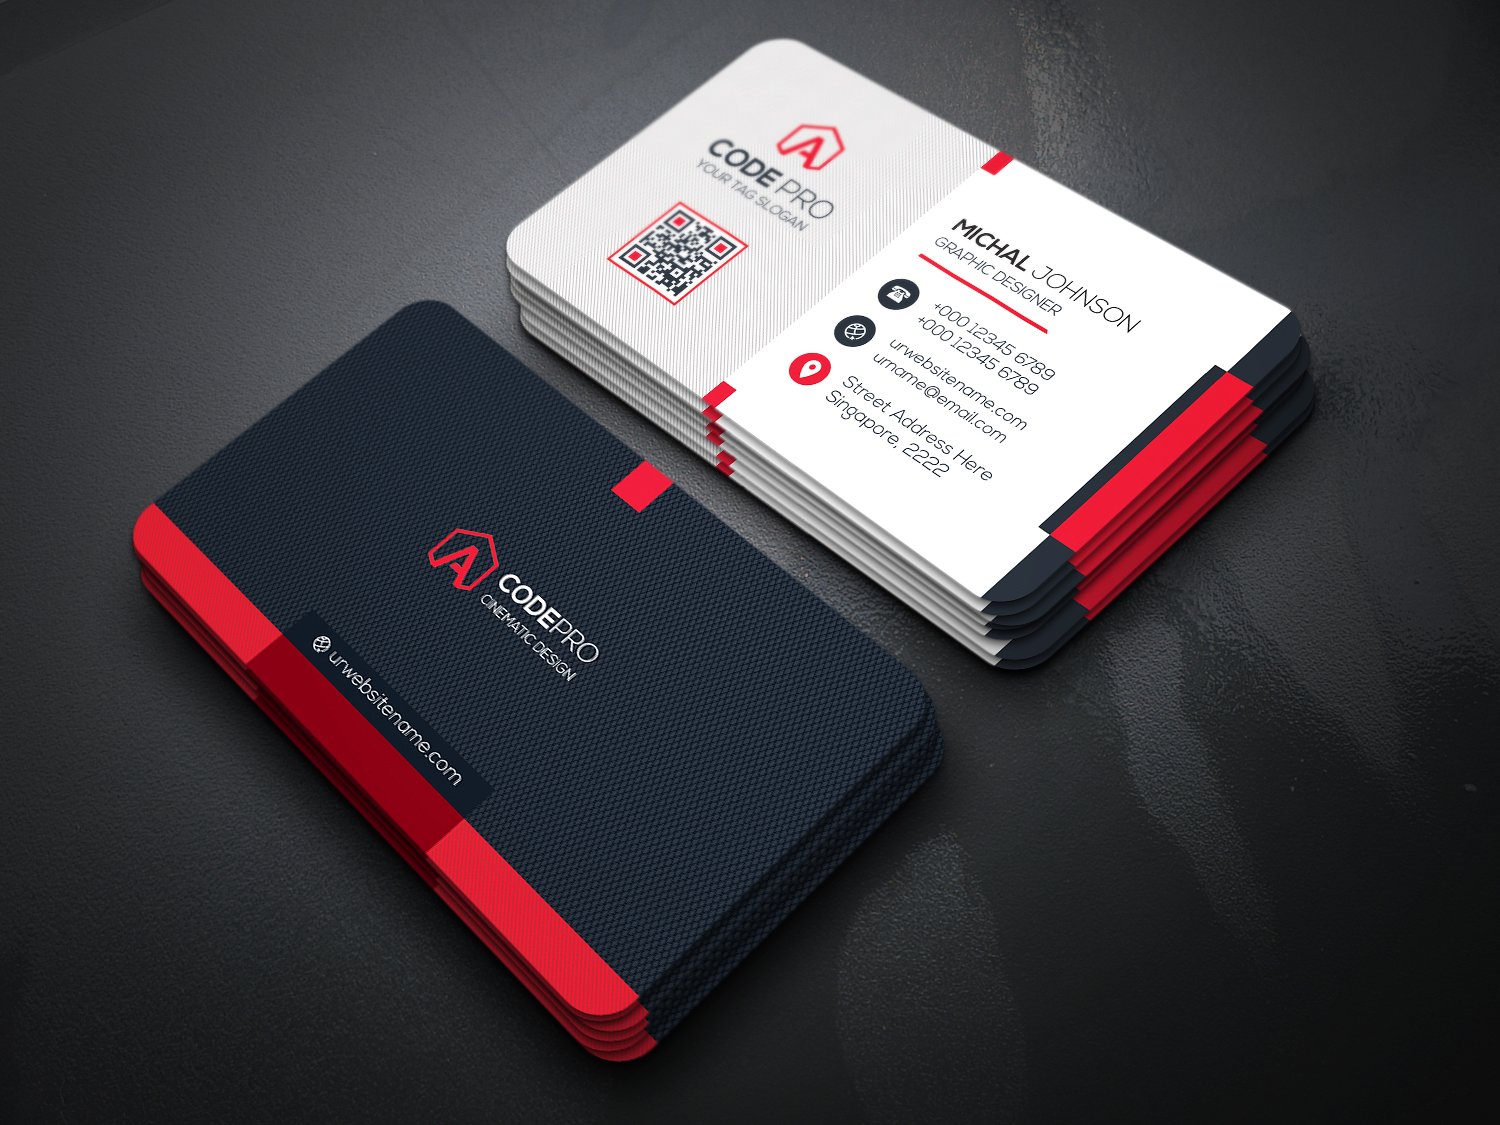 Design Professional Business Card For You for $5 - SEOClerks